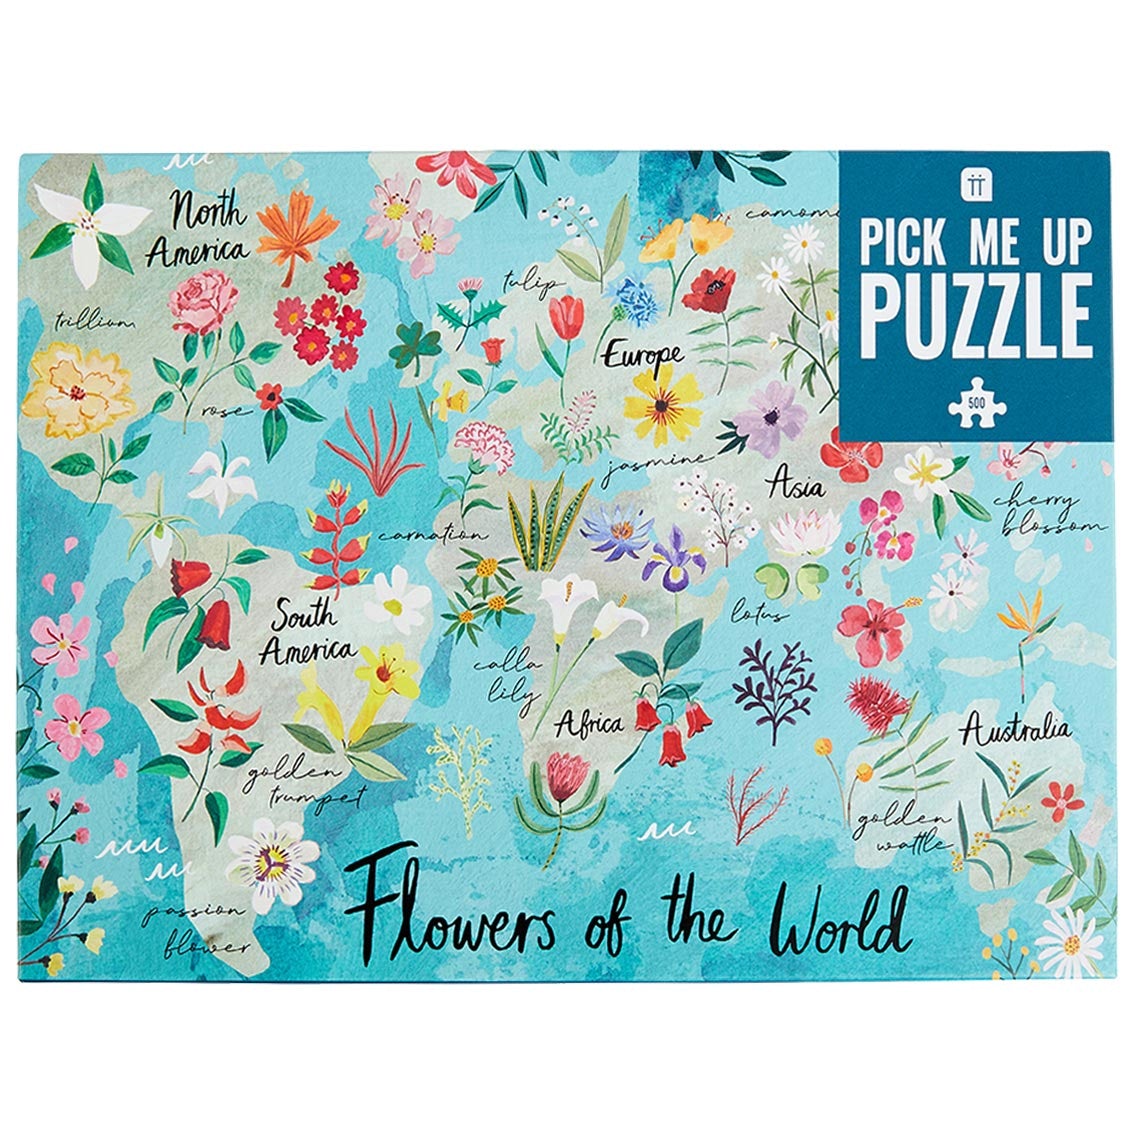 Flowers of the World | 500 Piece Jigsaw Puzzle Pick Me Up Puzzle Puzzledly.